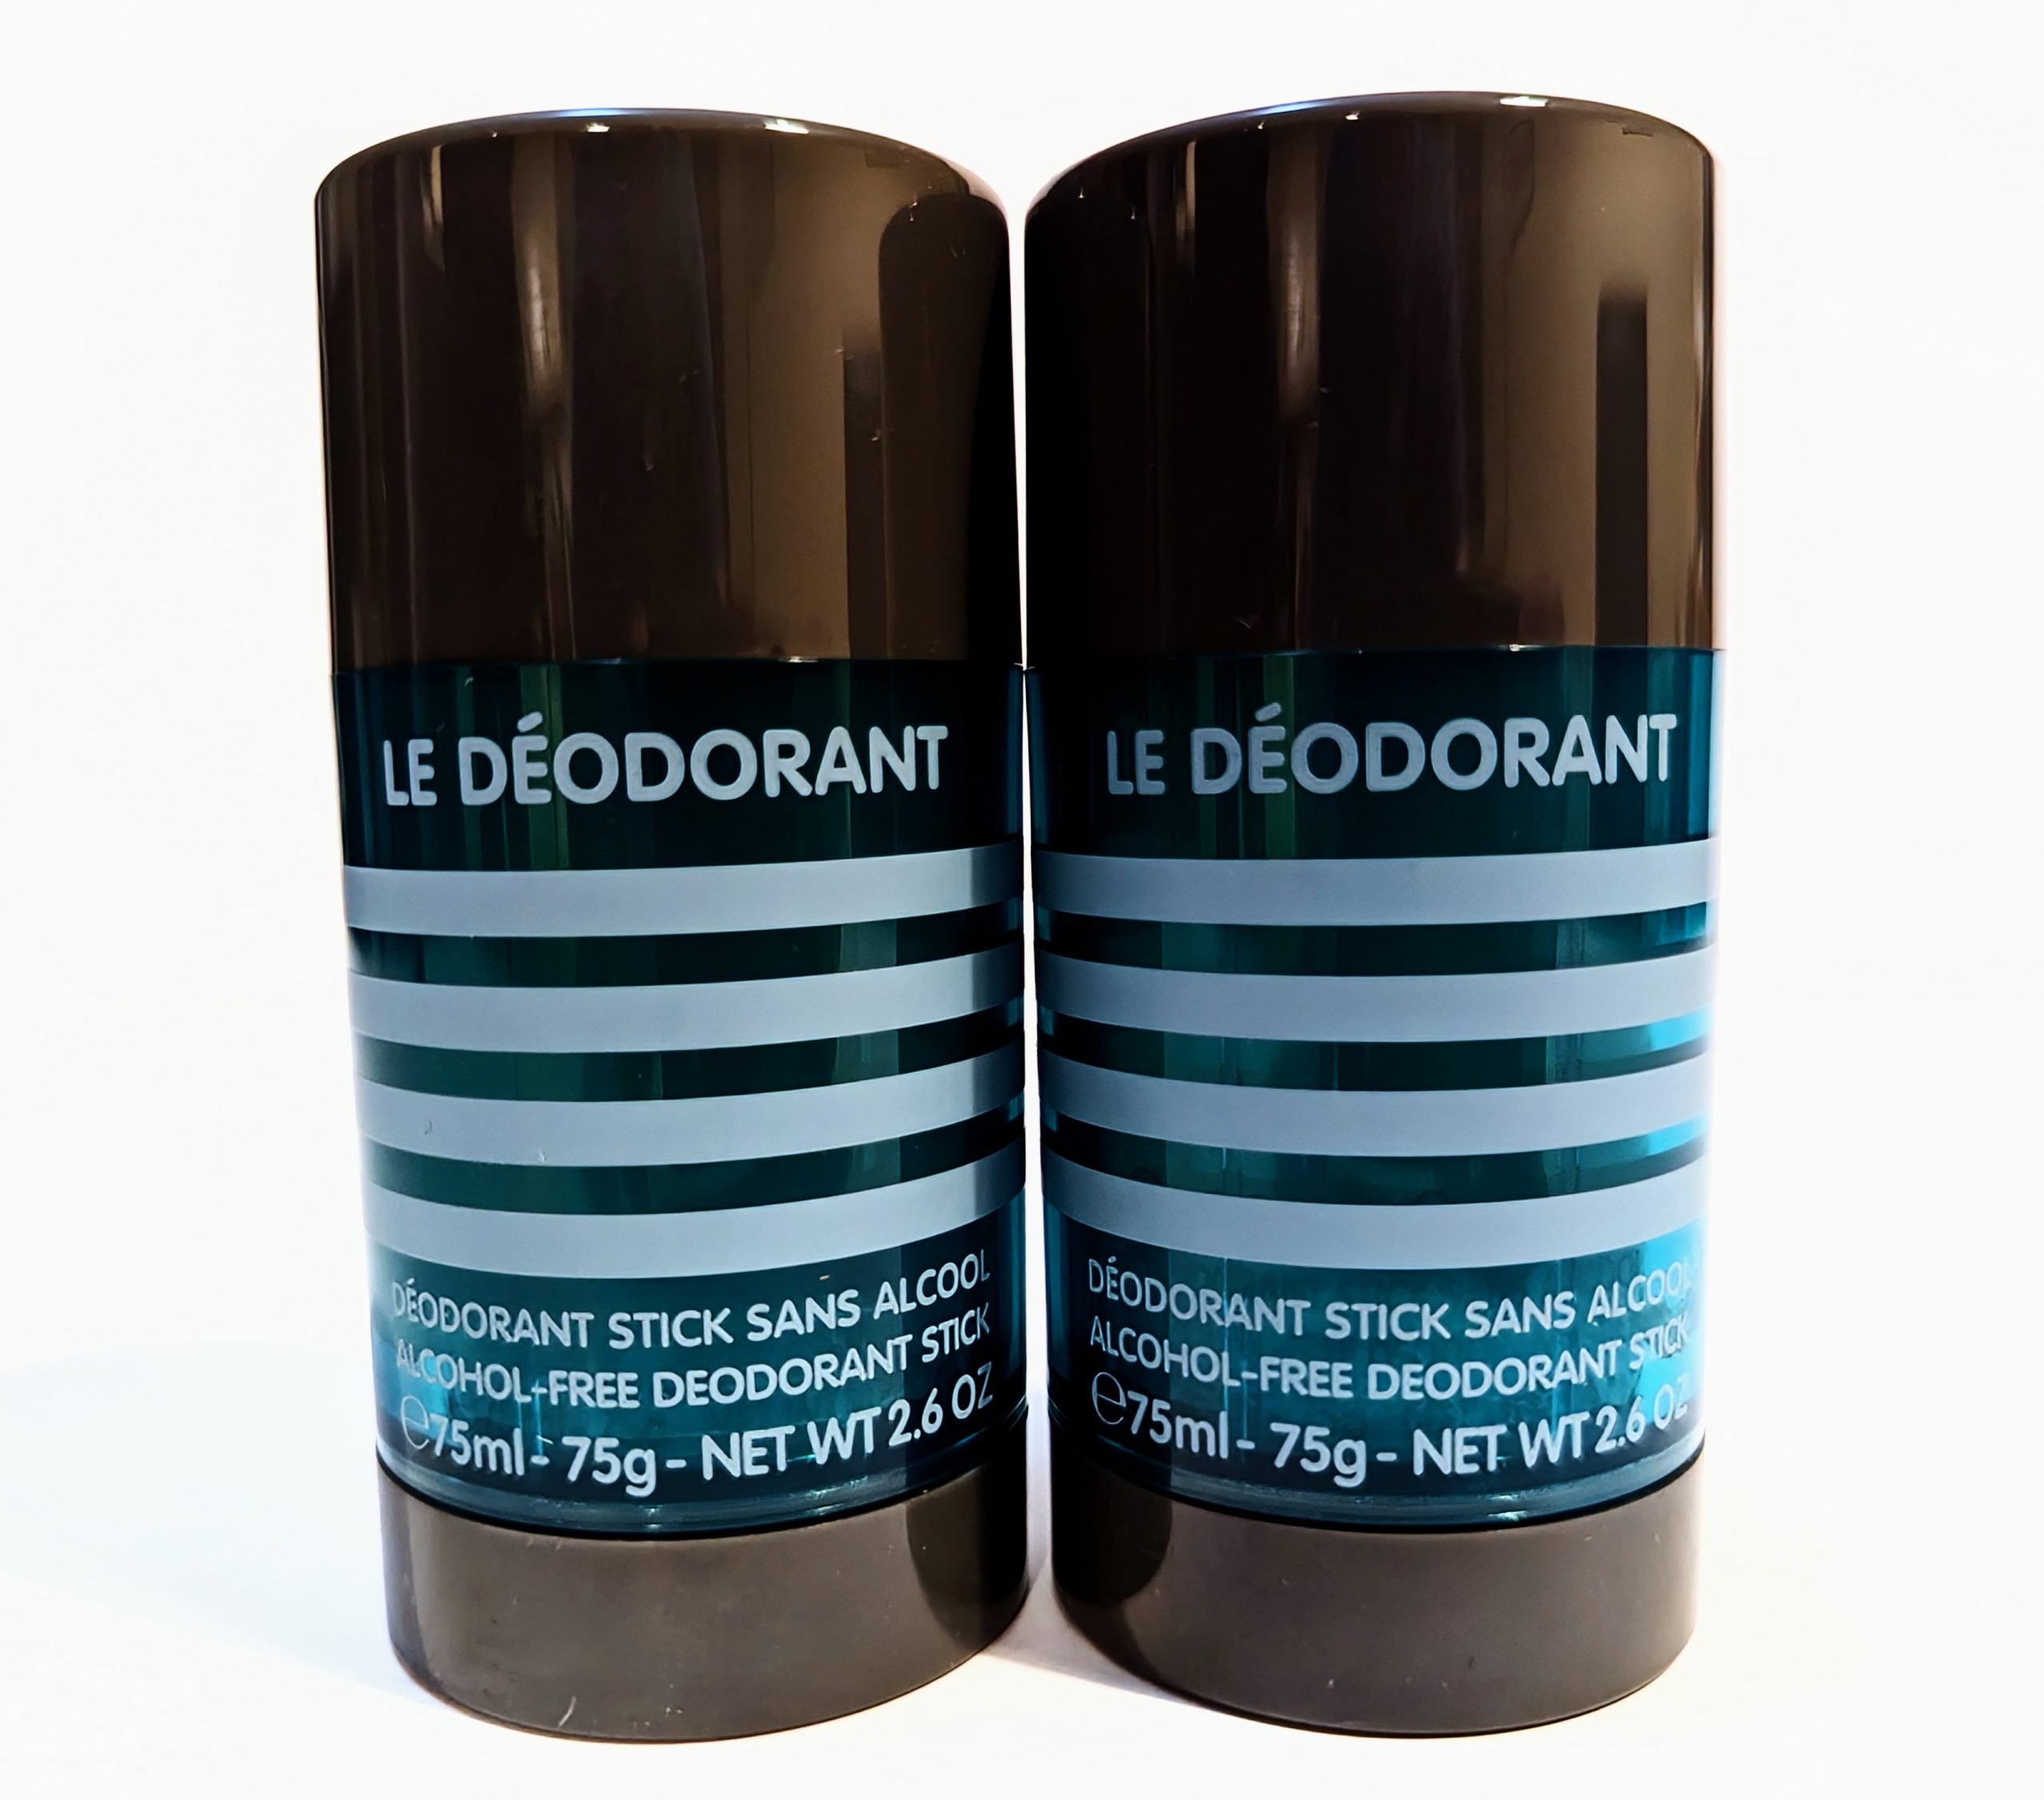 Two black cylindrical containers of “Le Déodorant,” labeled as alcohol-free deodorant sticks, each containing 75 ml (2.6 oz) of product.